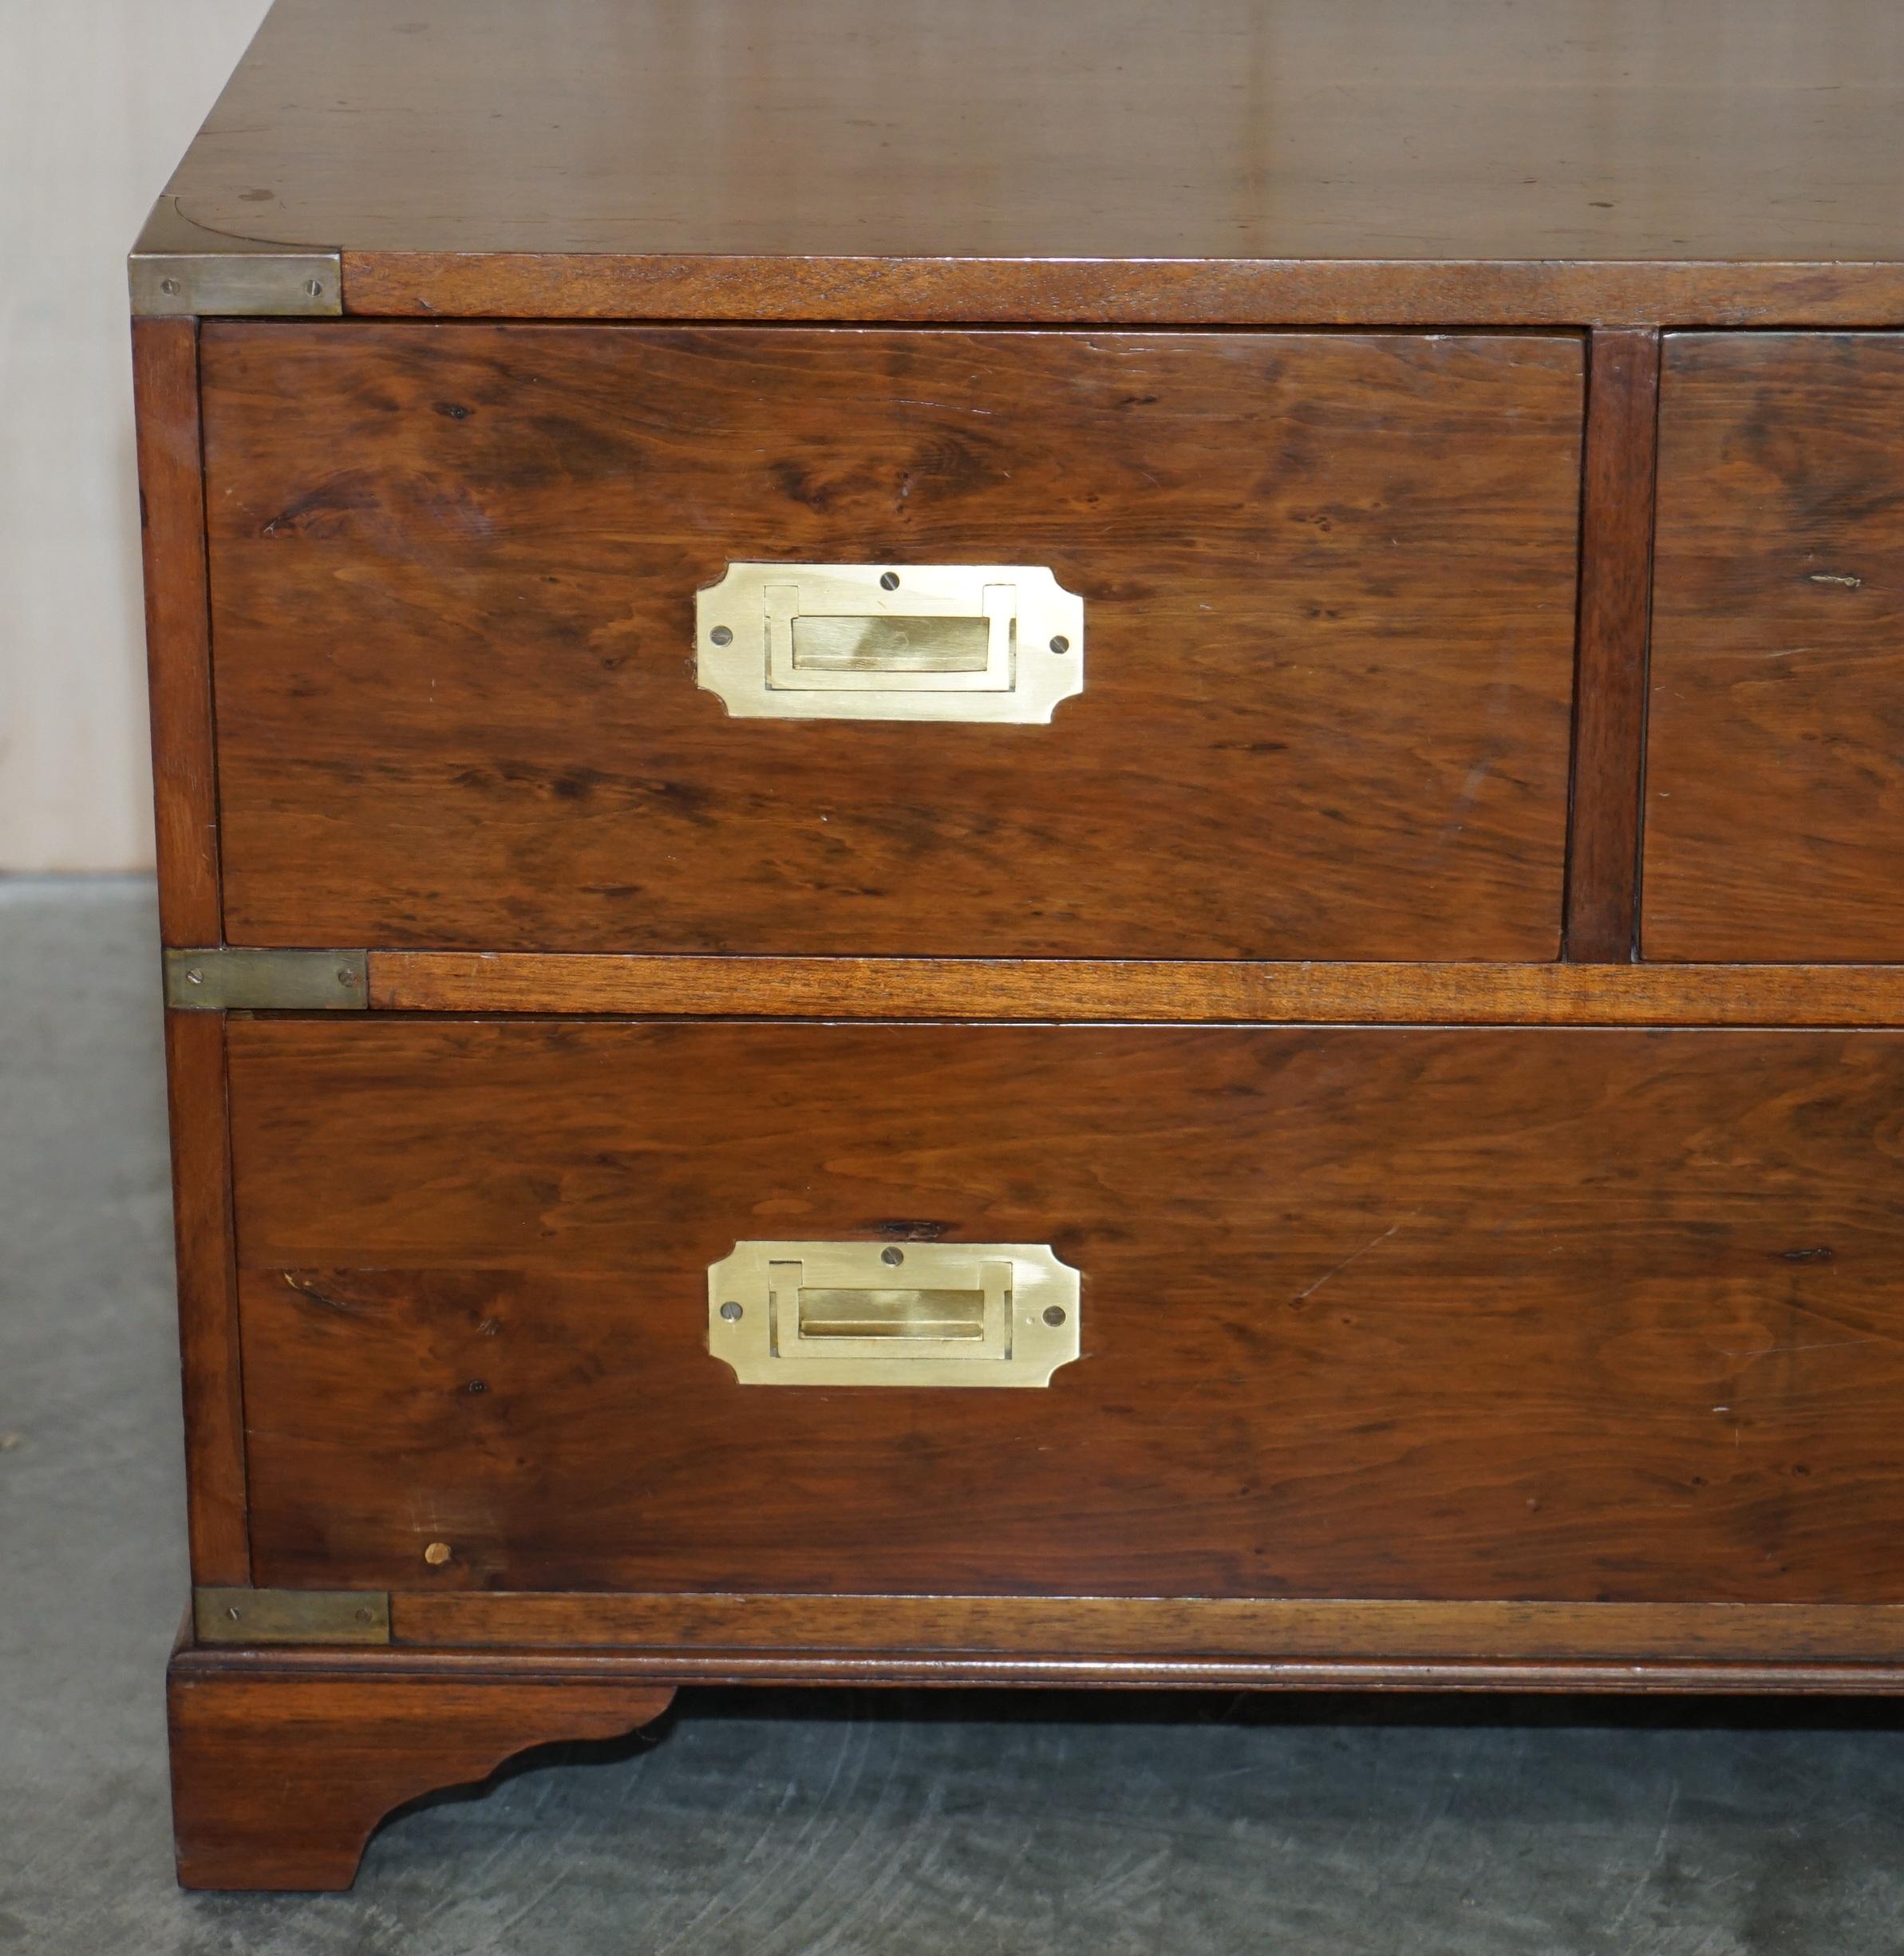 20th Century Burr Yew Wood Military Campaign Three Drawer Chest of Drawers TV Media Stand